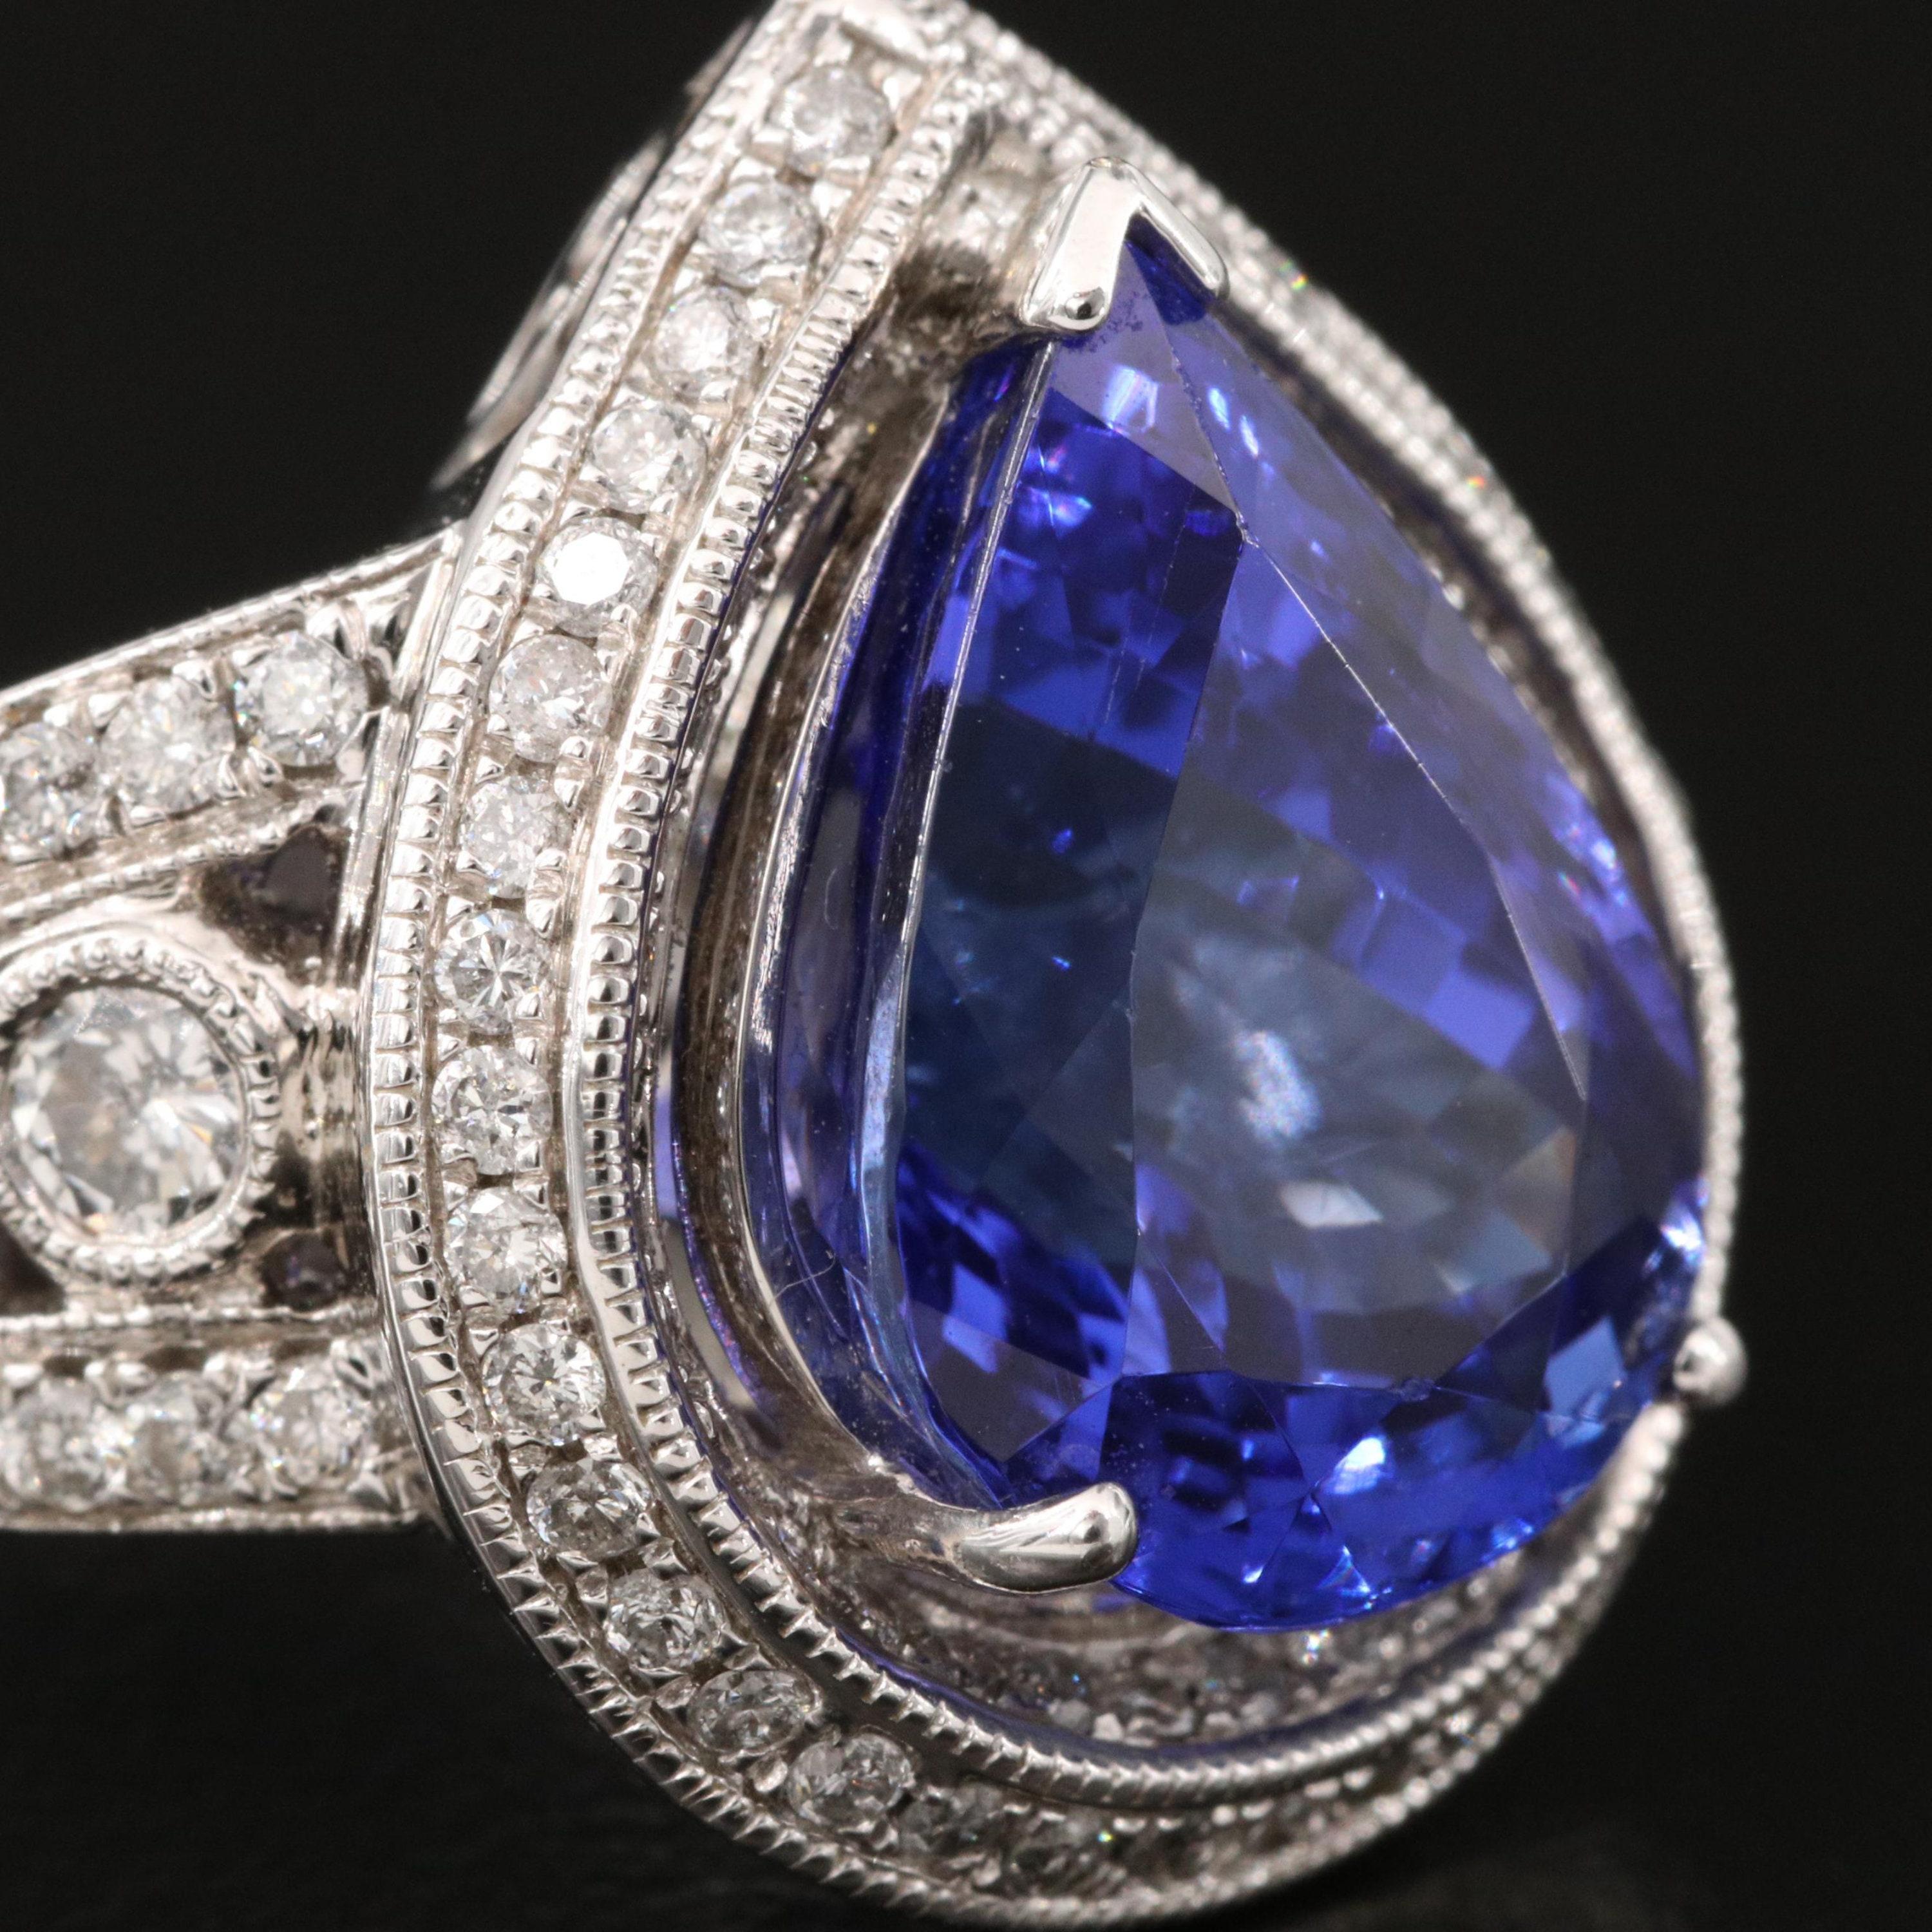 For Sale:  6.7 Carat Art Deco Pear Cut Tanzanite Engagement Ring White Gold Wedding Ring 4